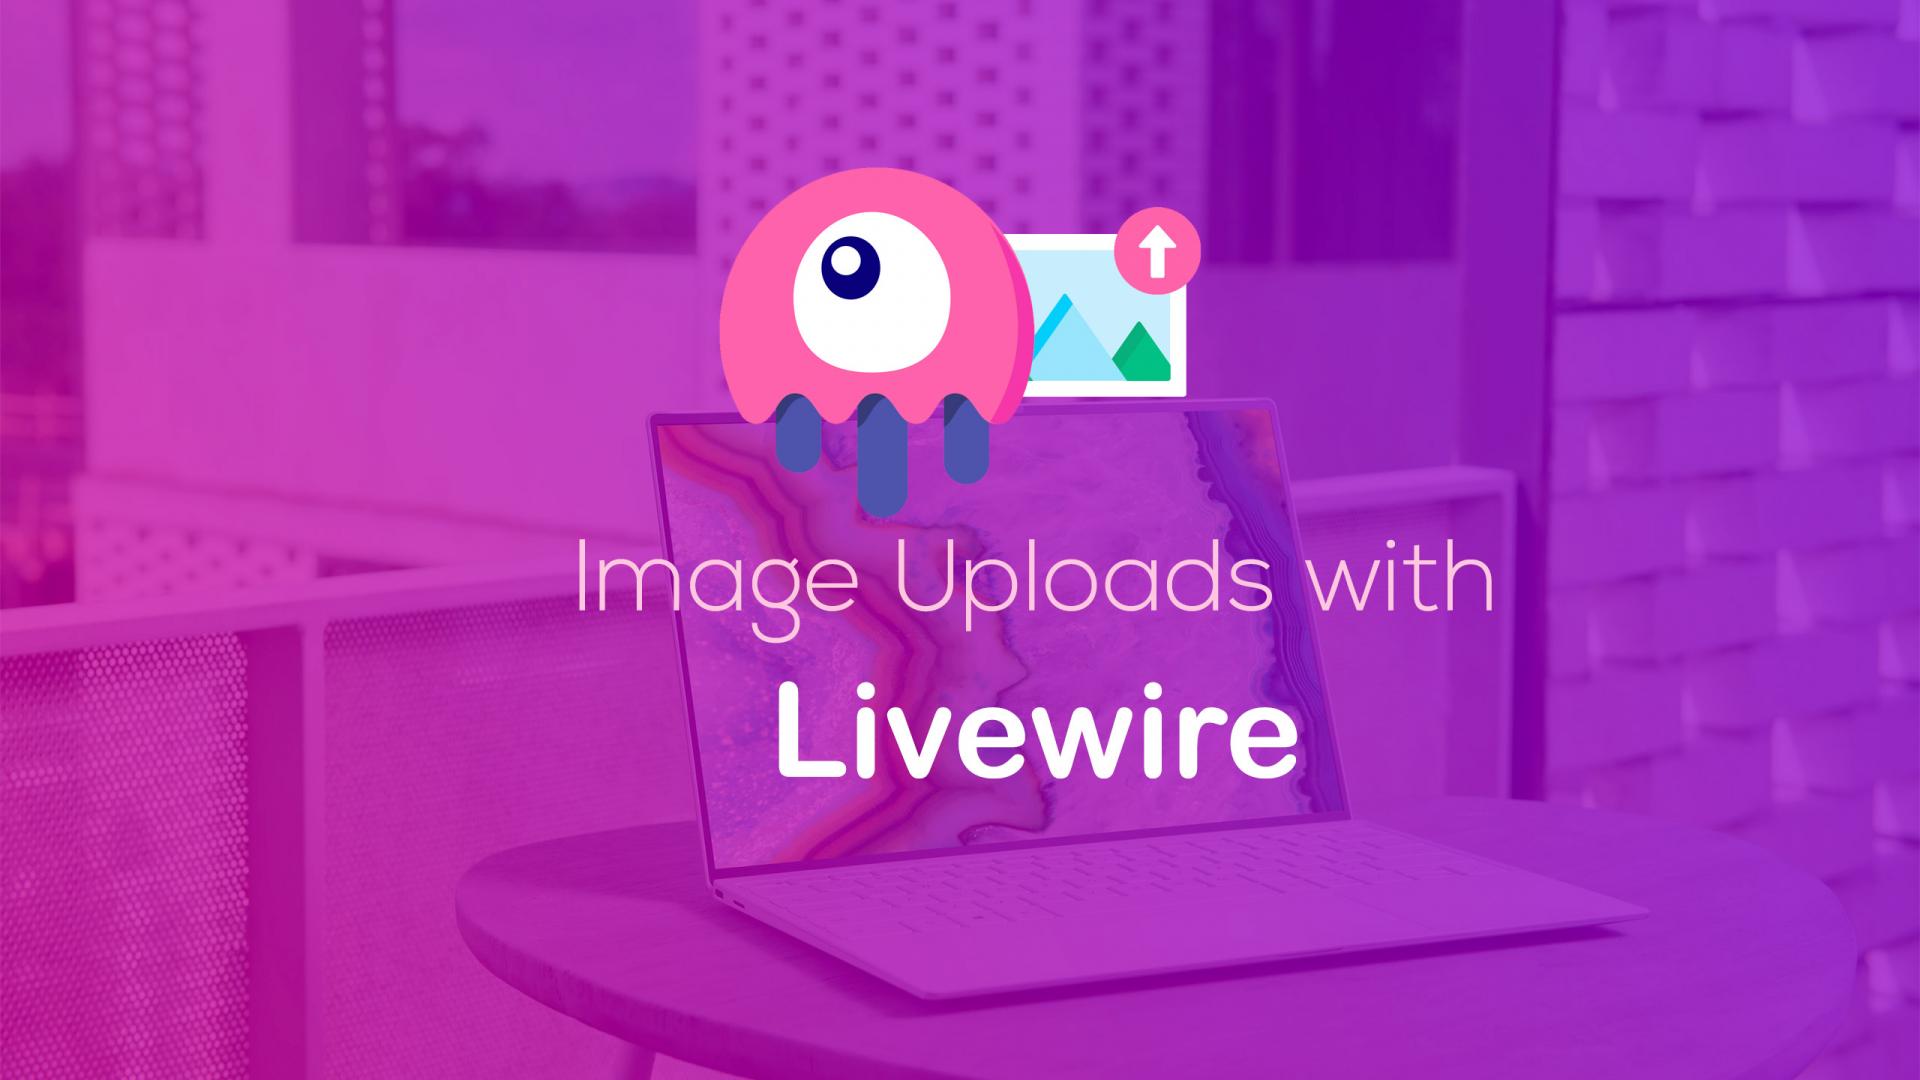 Image Uploads with Livewire